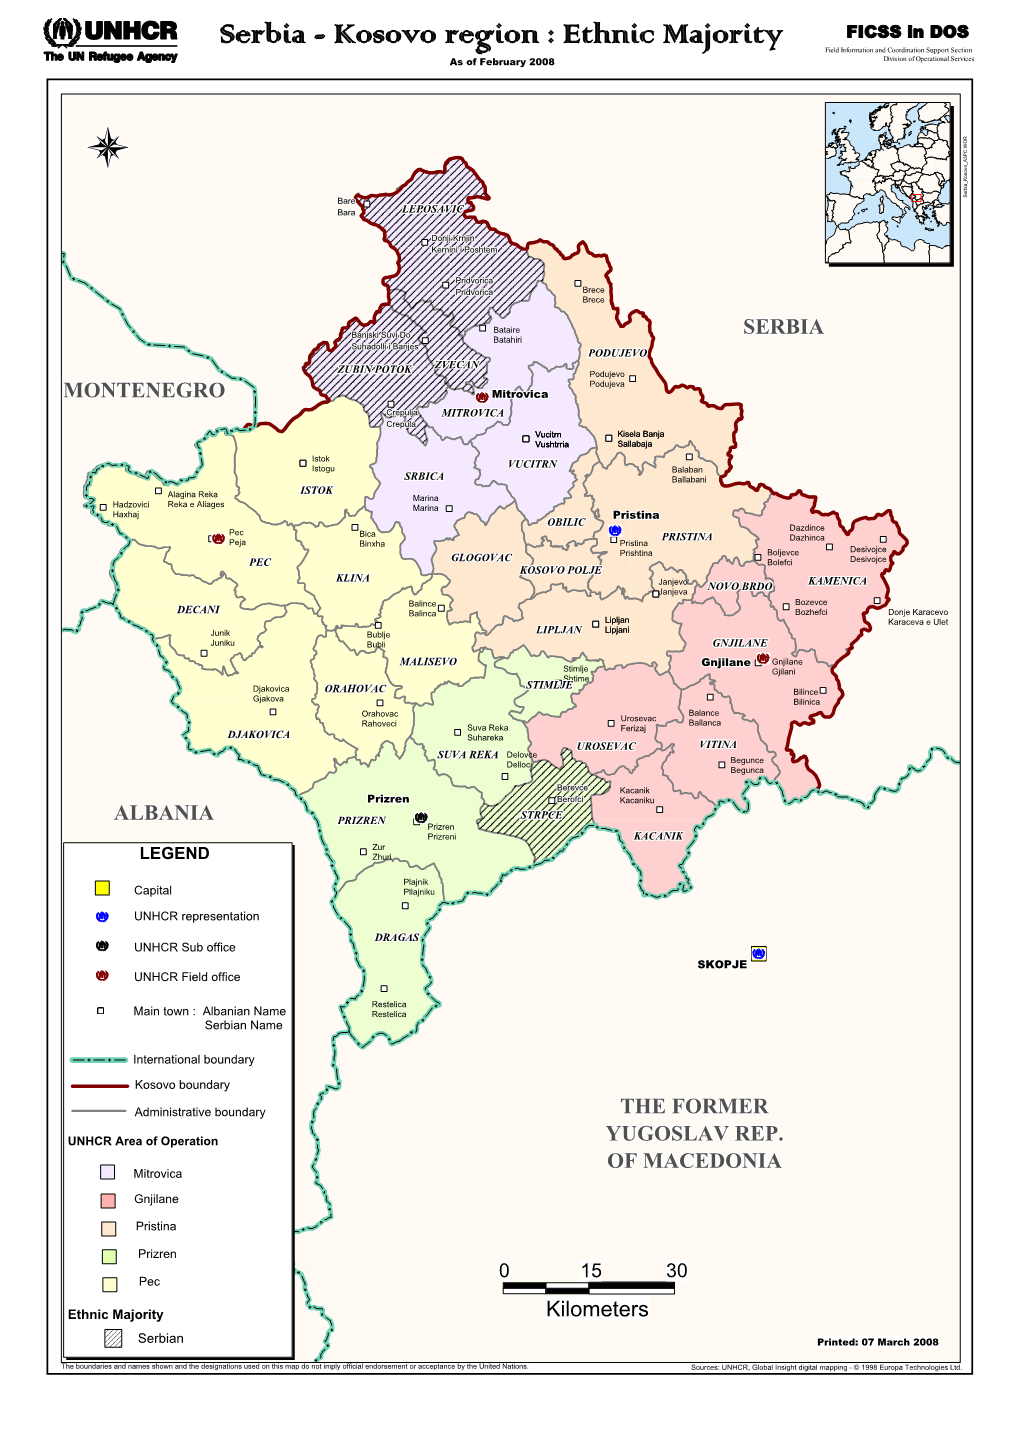 Ethnic Majority Field Information and Coordination Support Section As of February 2008 Division of Operational Services